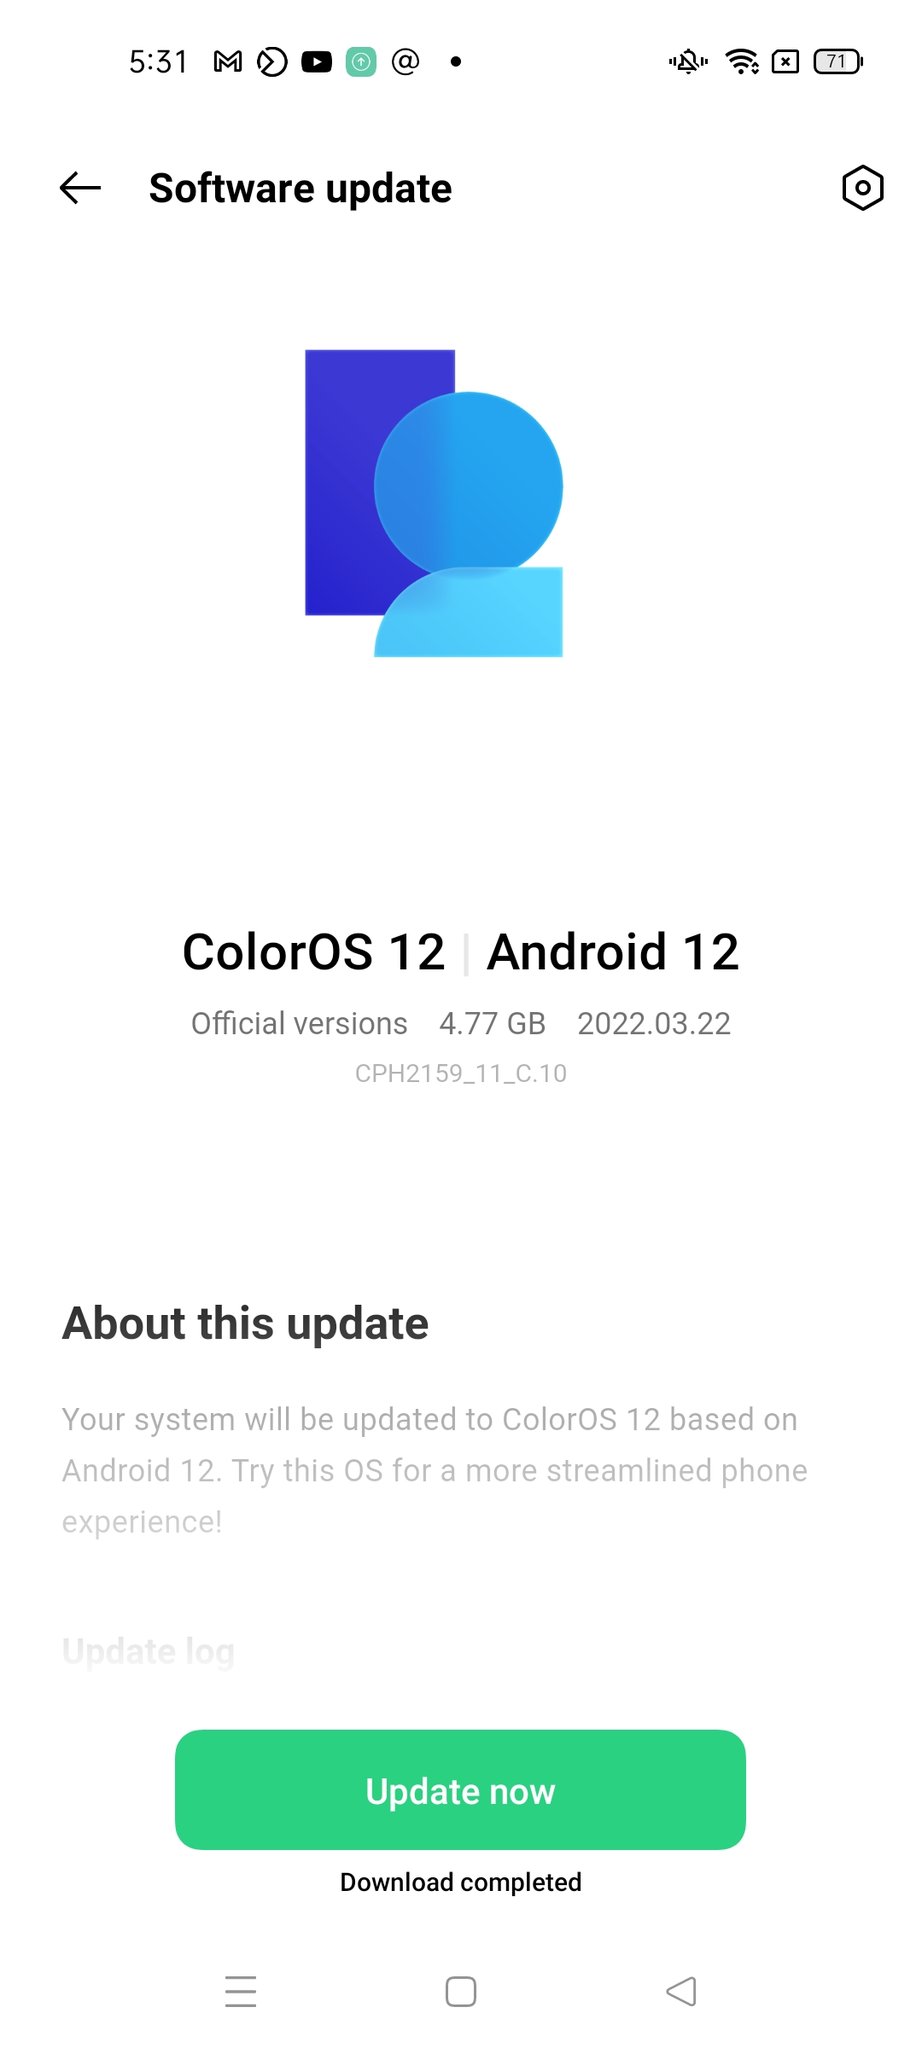 OPPO Reno5 bags Android 12 update with ColorOS 12 in Kenya Reno5f Android 12 with Color OS 12 in Kenya